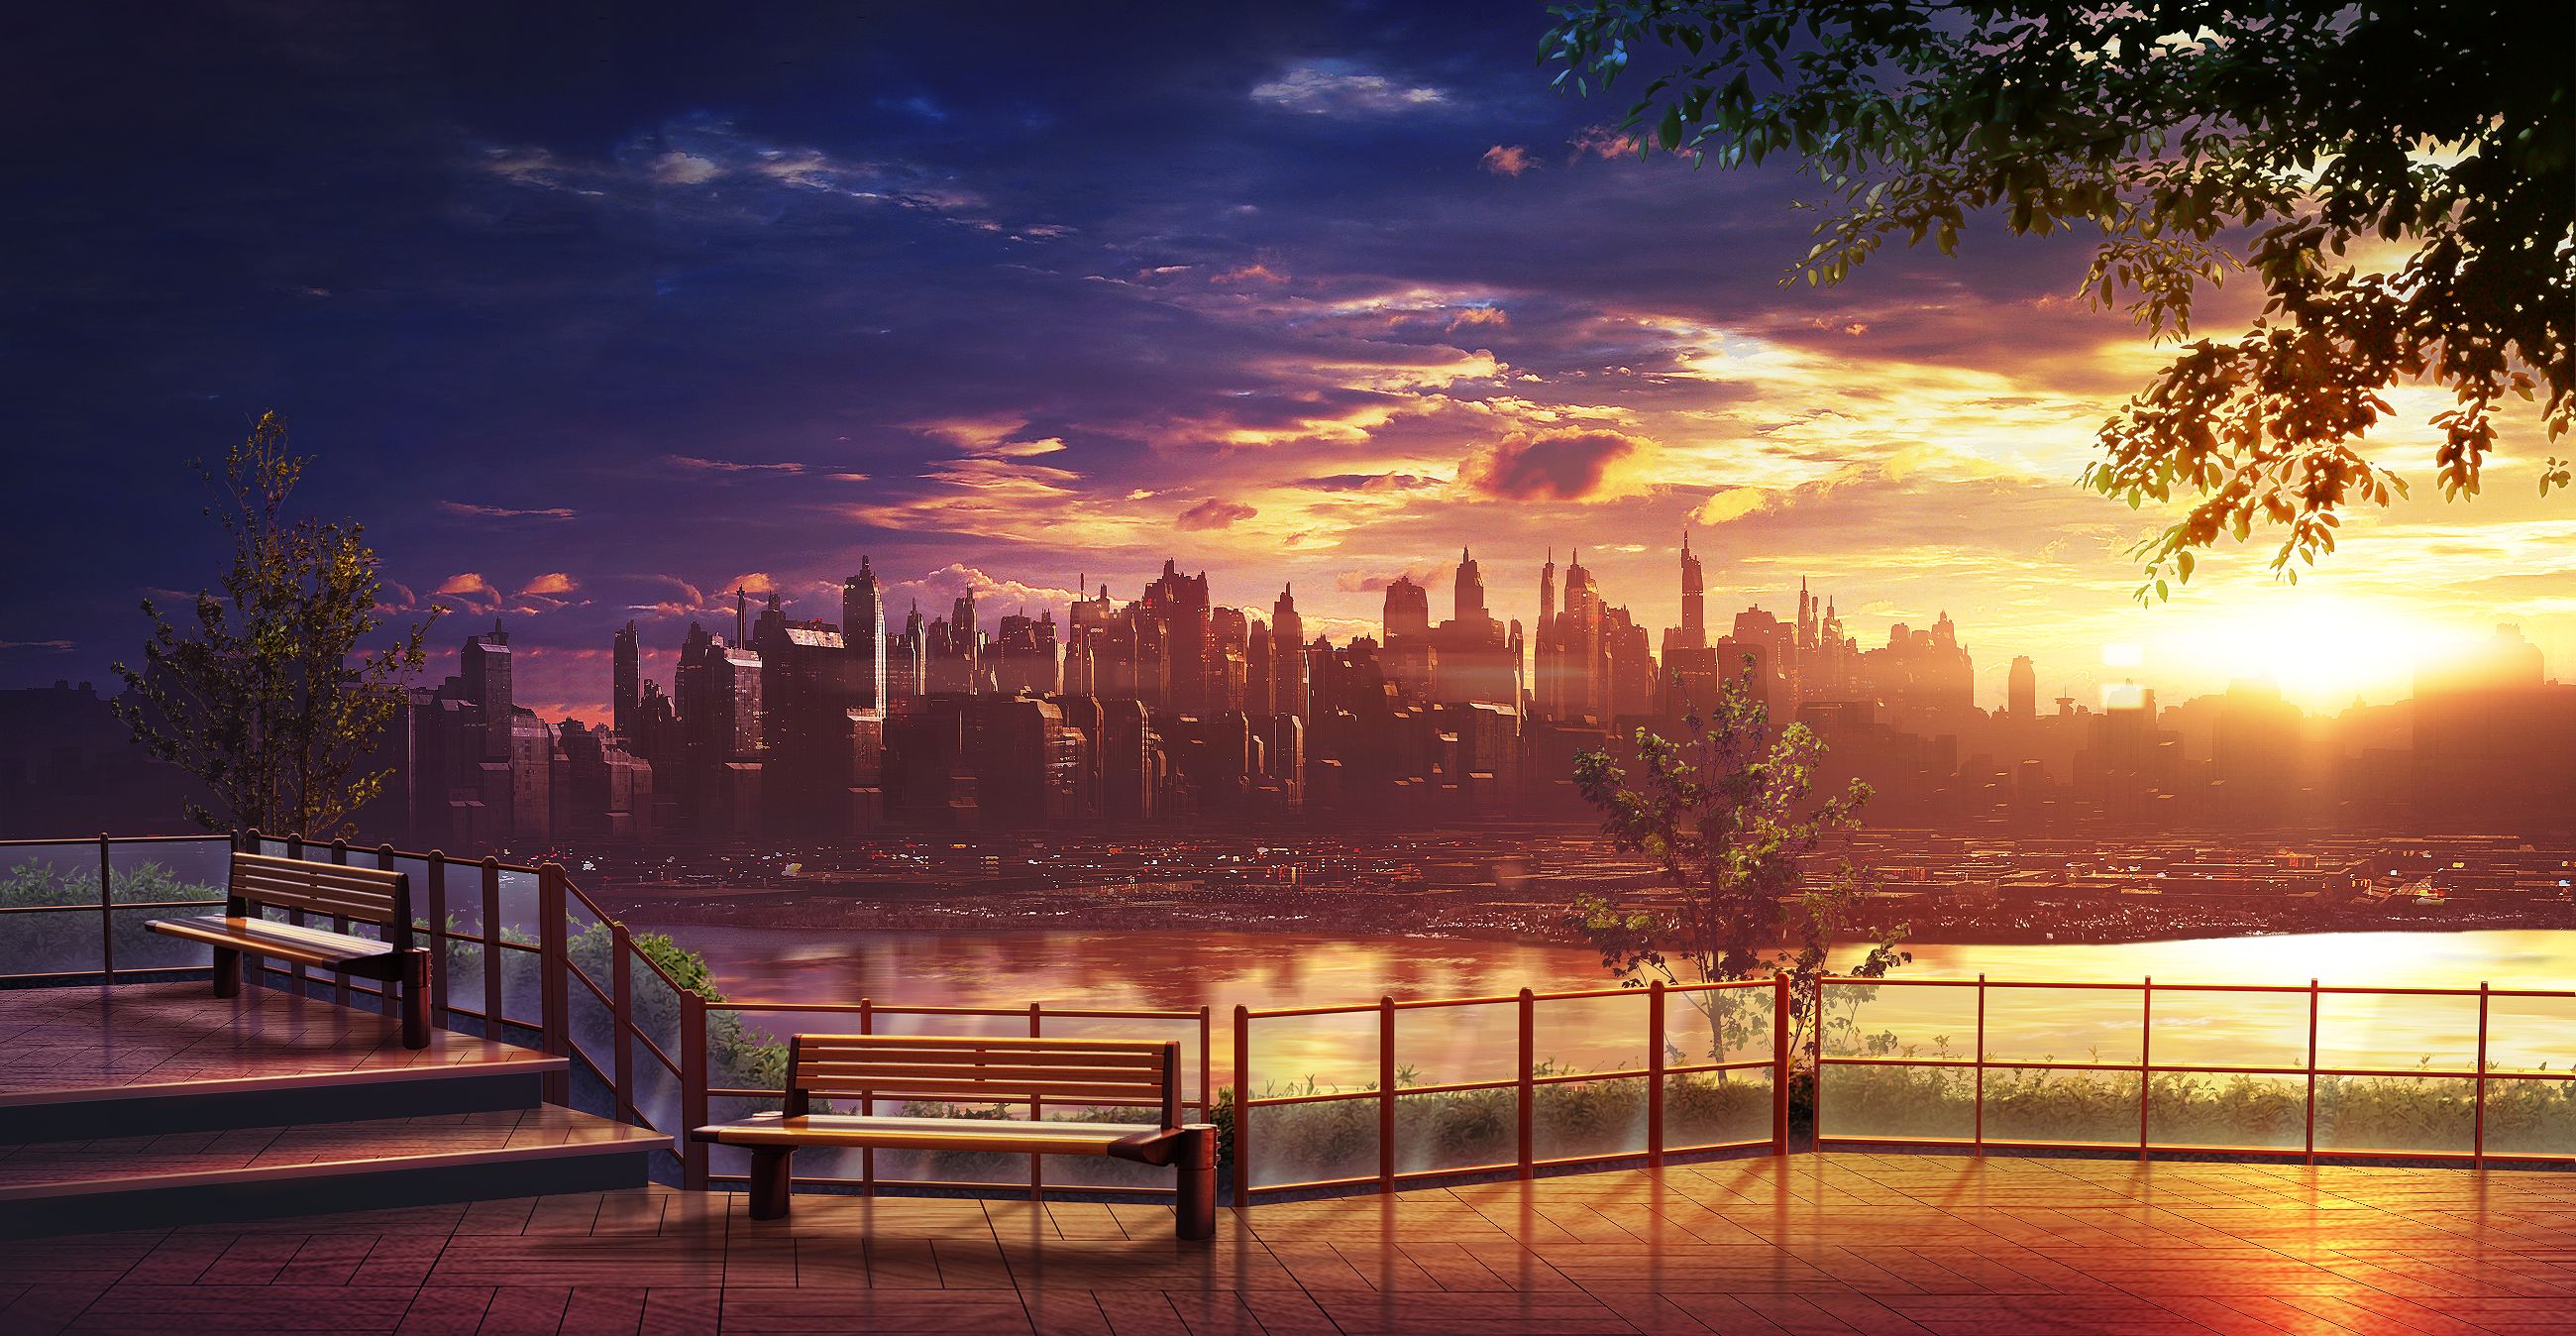 lake, stairs, sky, evening, anime, city, bench, cloud, parc, sunset